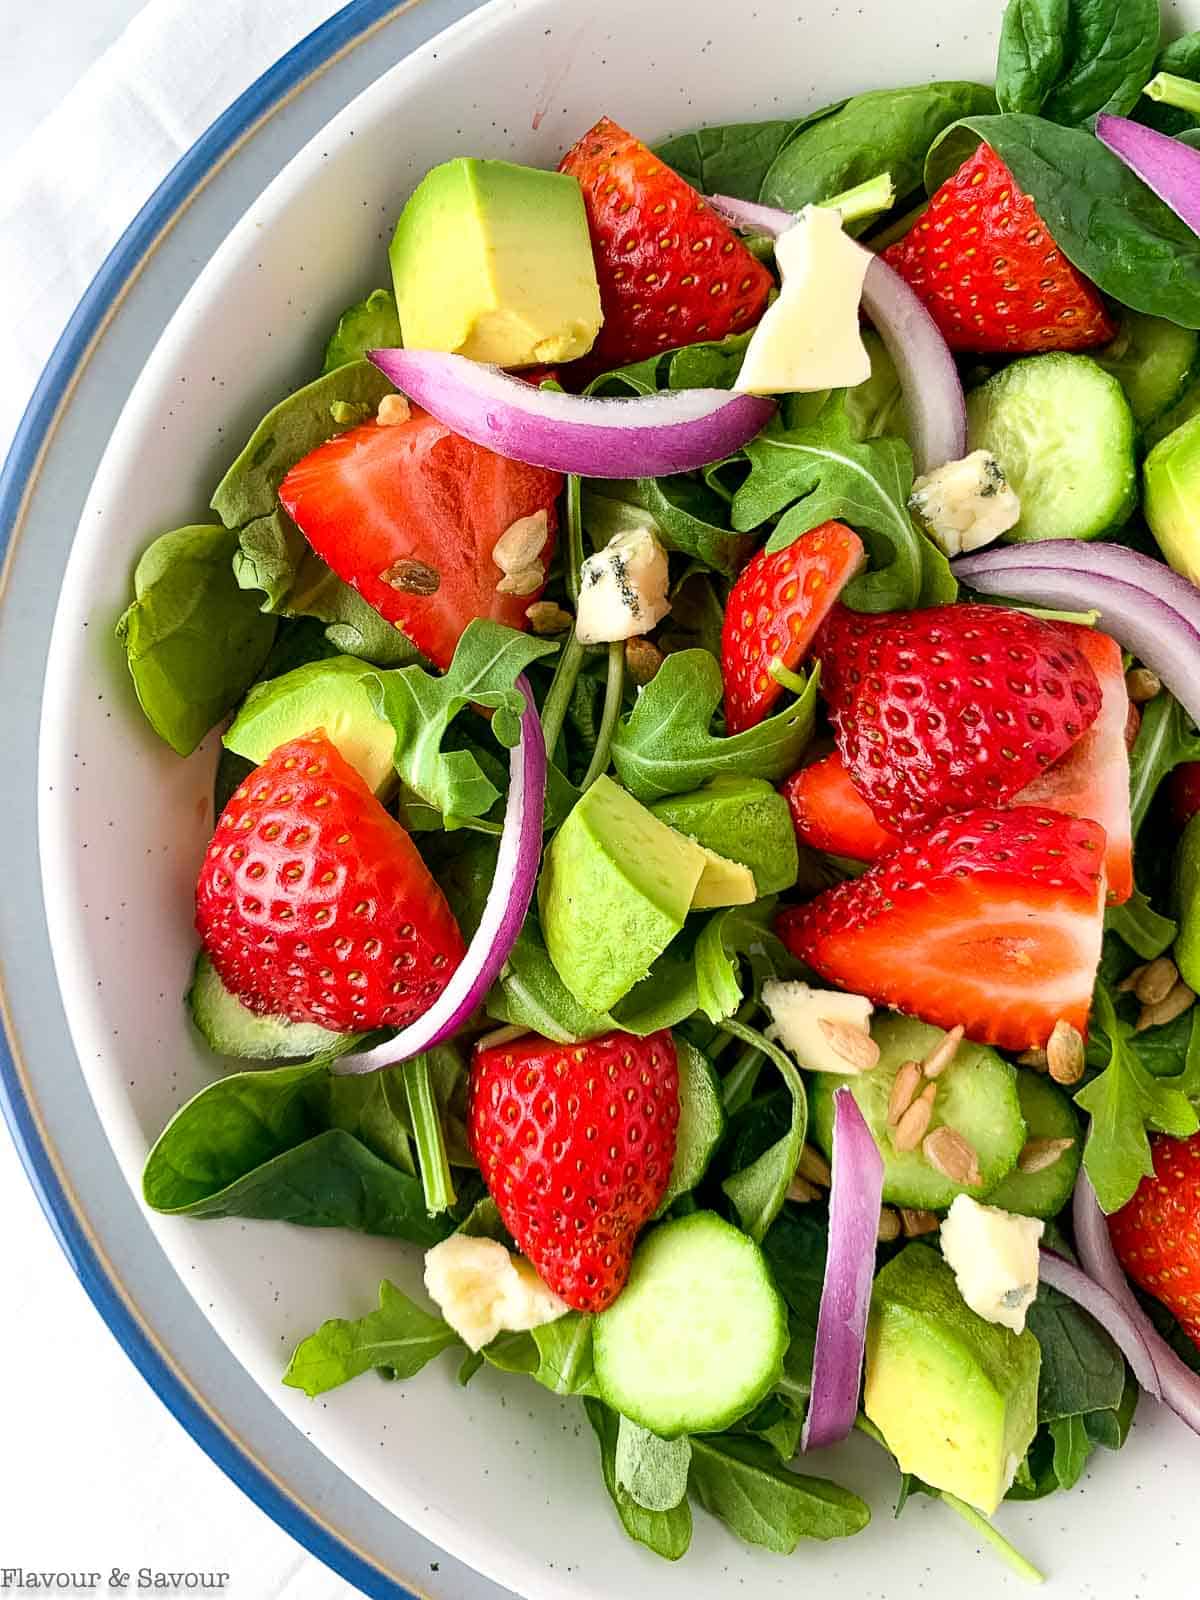 Strawberry Spinach Salad with Strawberry Dressing